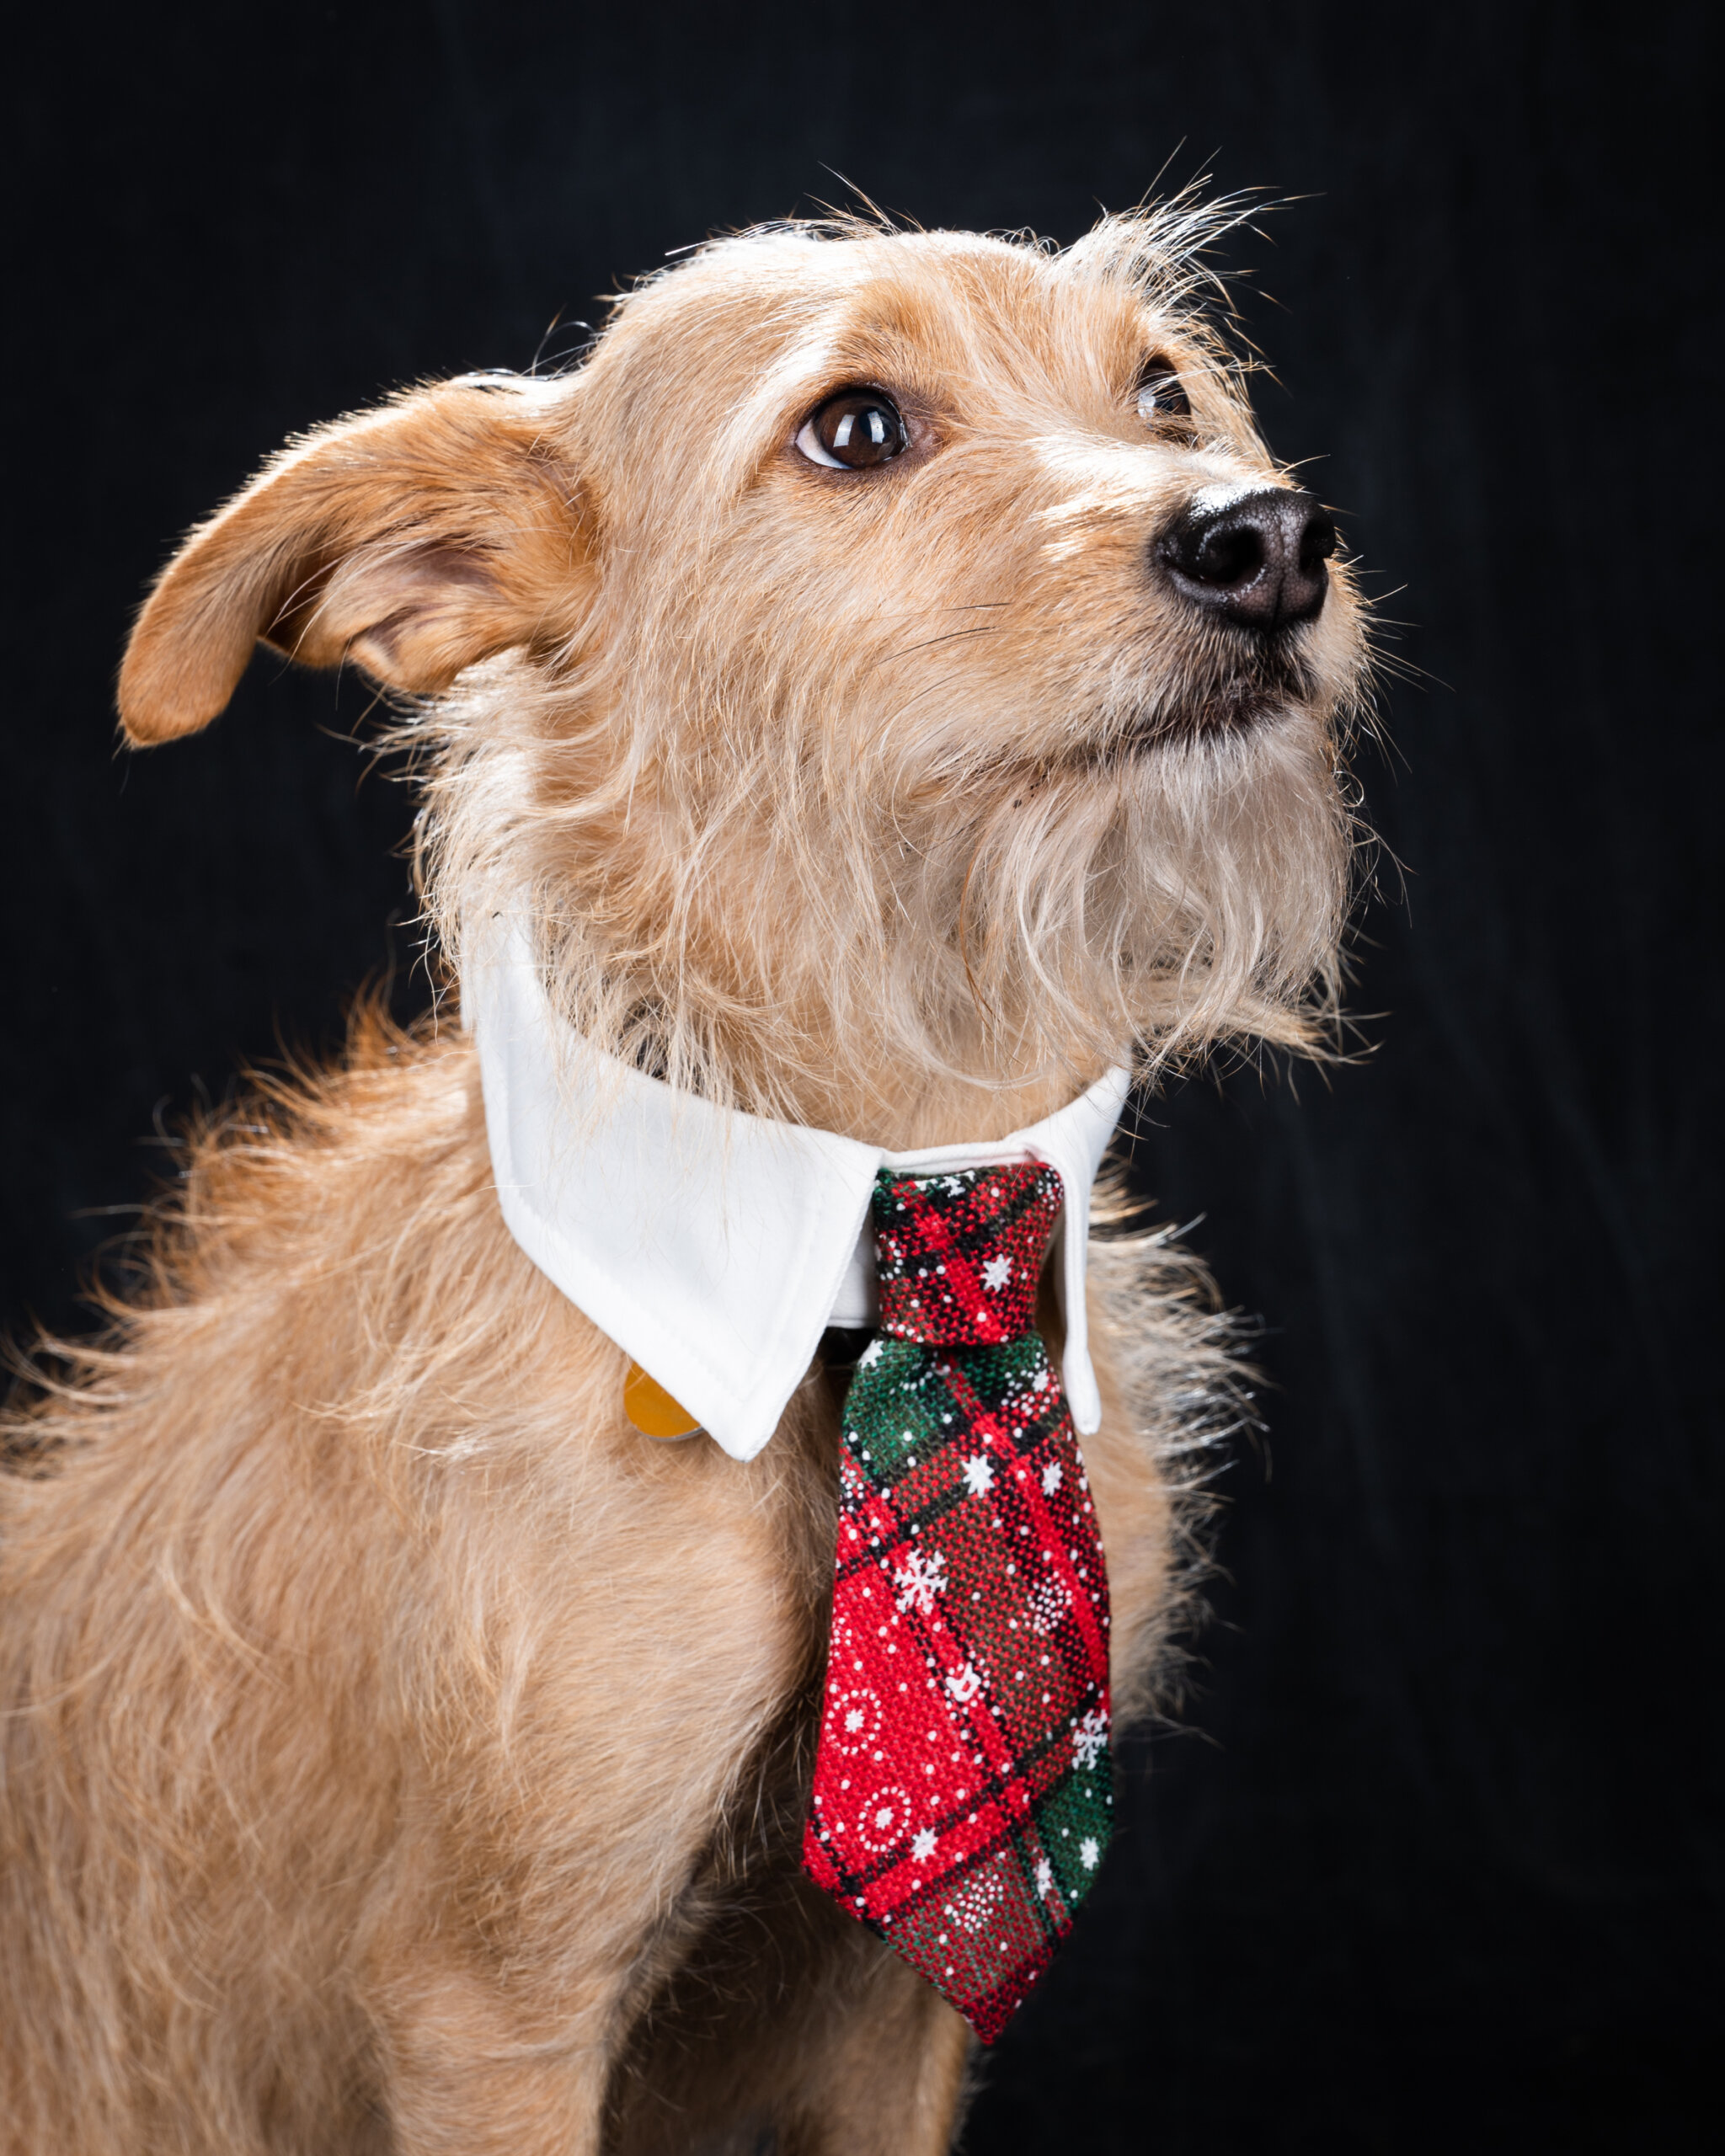 Pup portrait of Albie wearing a collar and tie